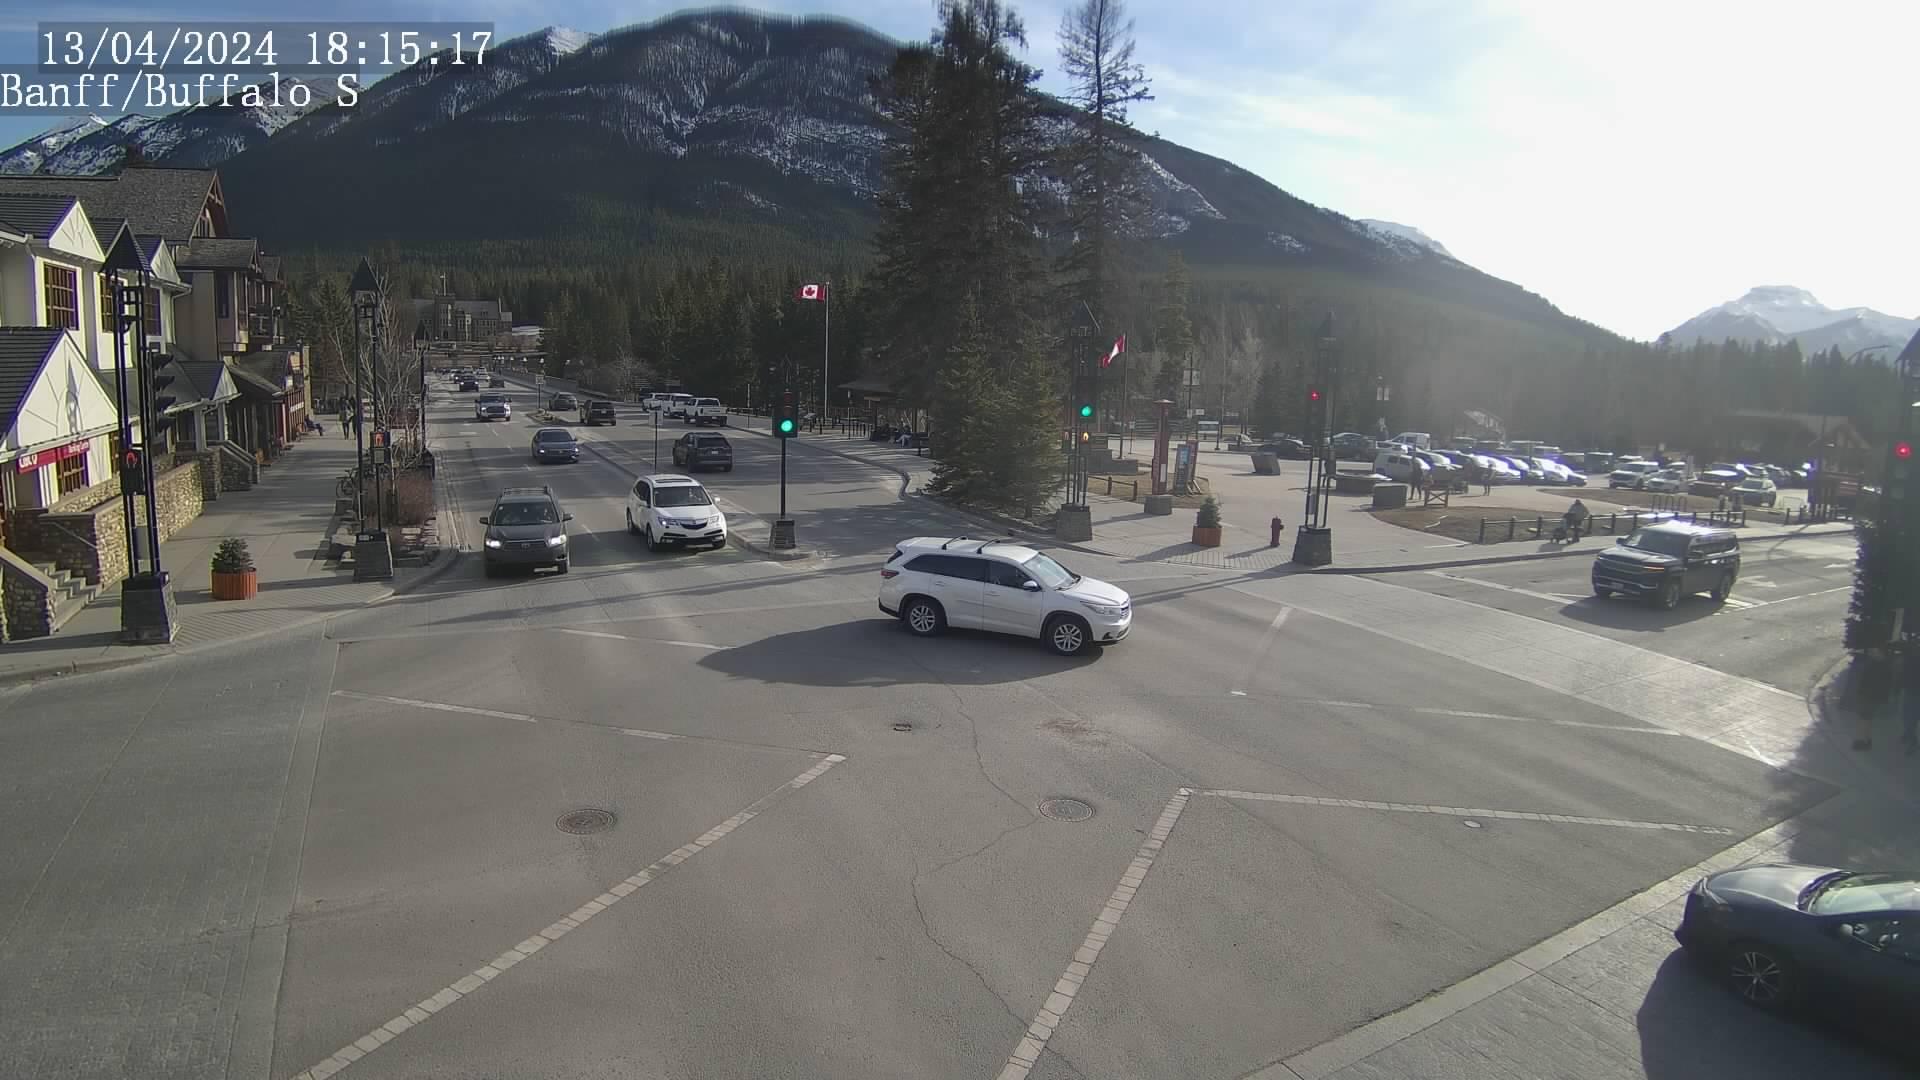 Downtown District: Buffalo St and Banff Ave Traffic Camera